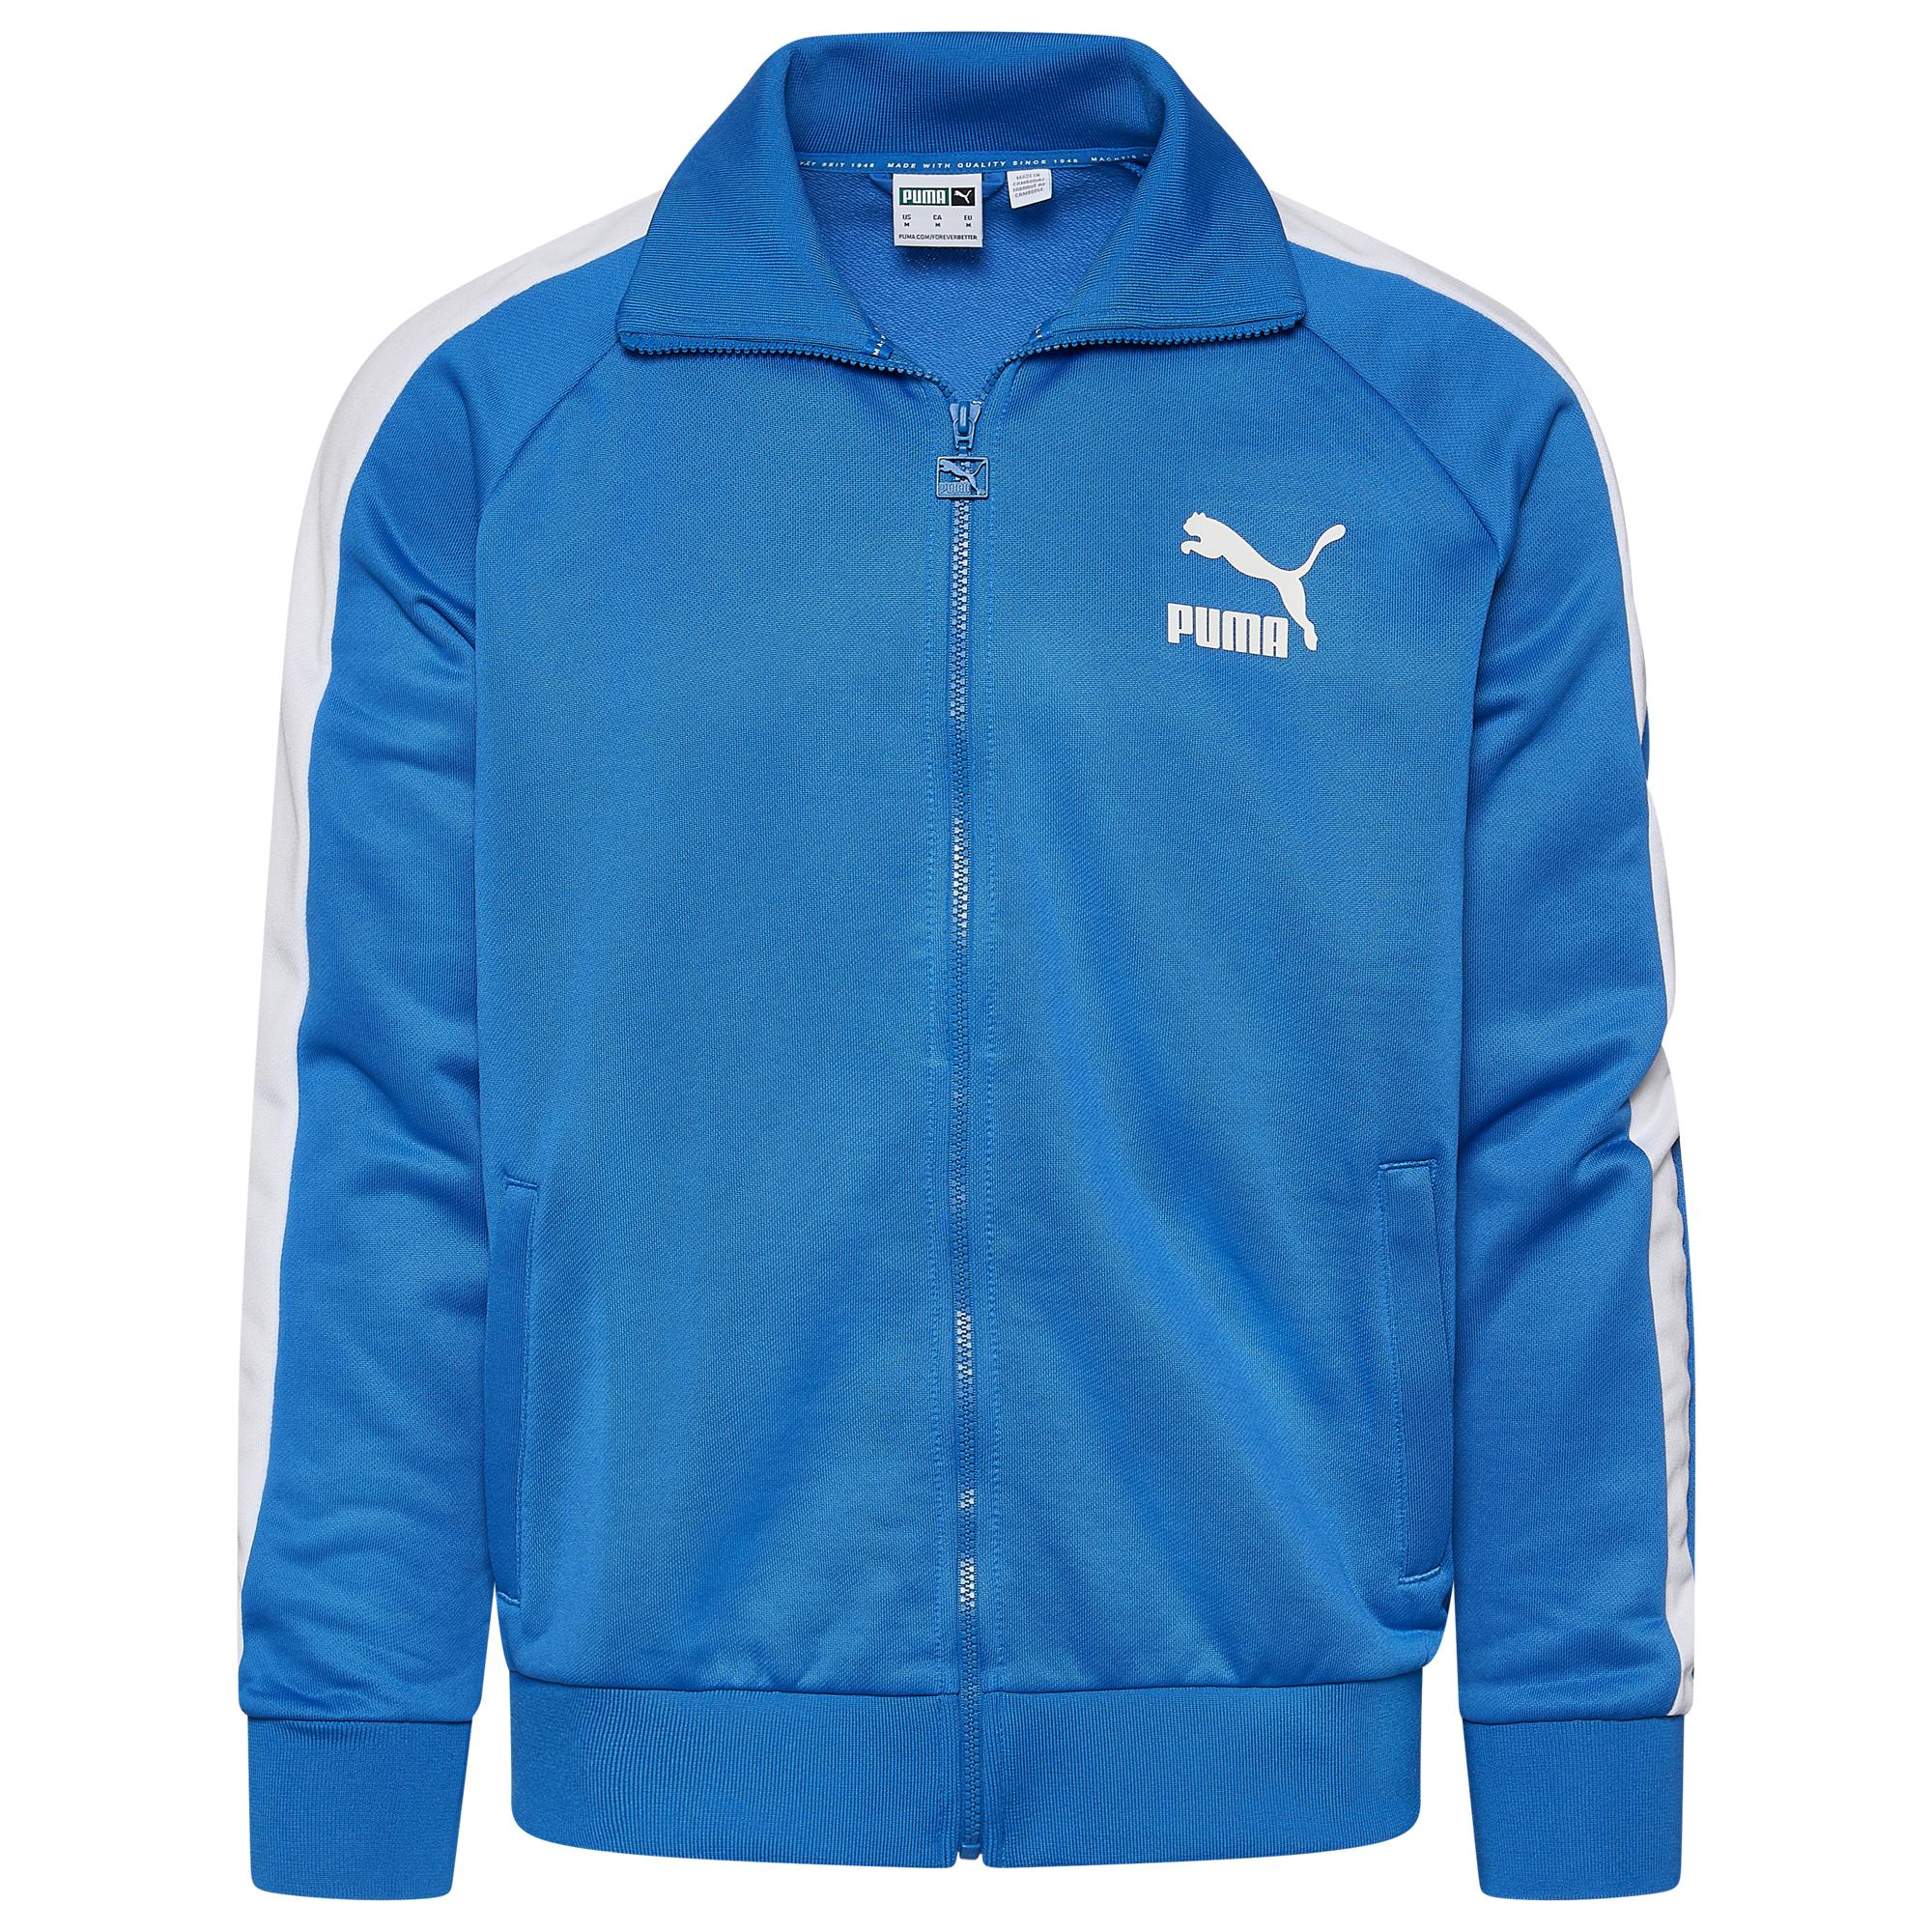 PUMA Synthetic Iconic T7 Track Jacket in Blue for Men - Lyst